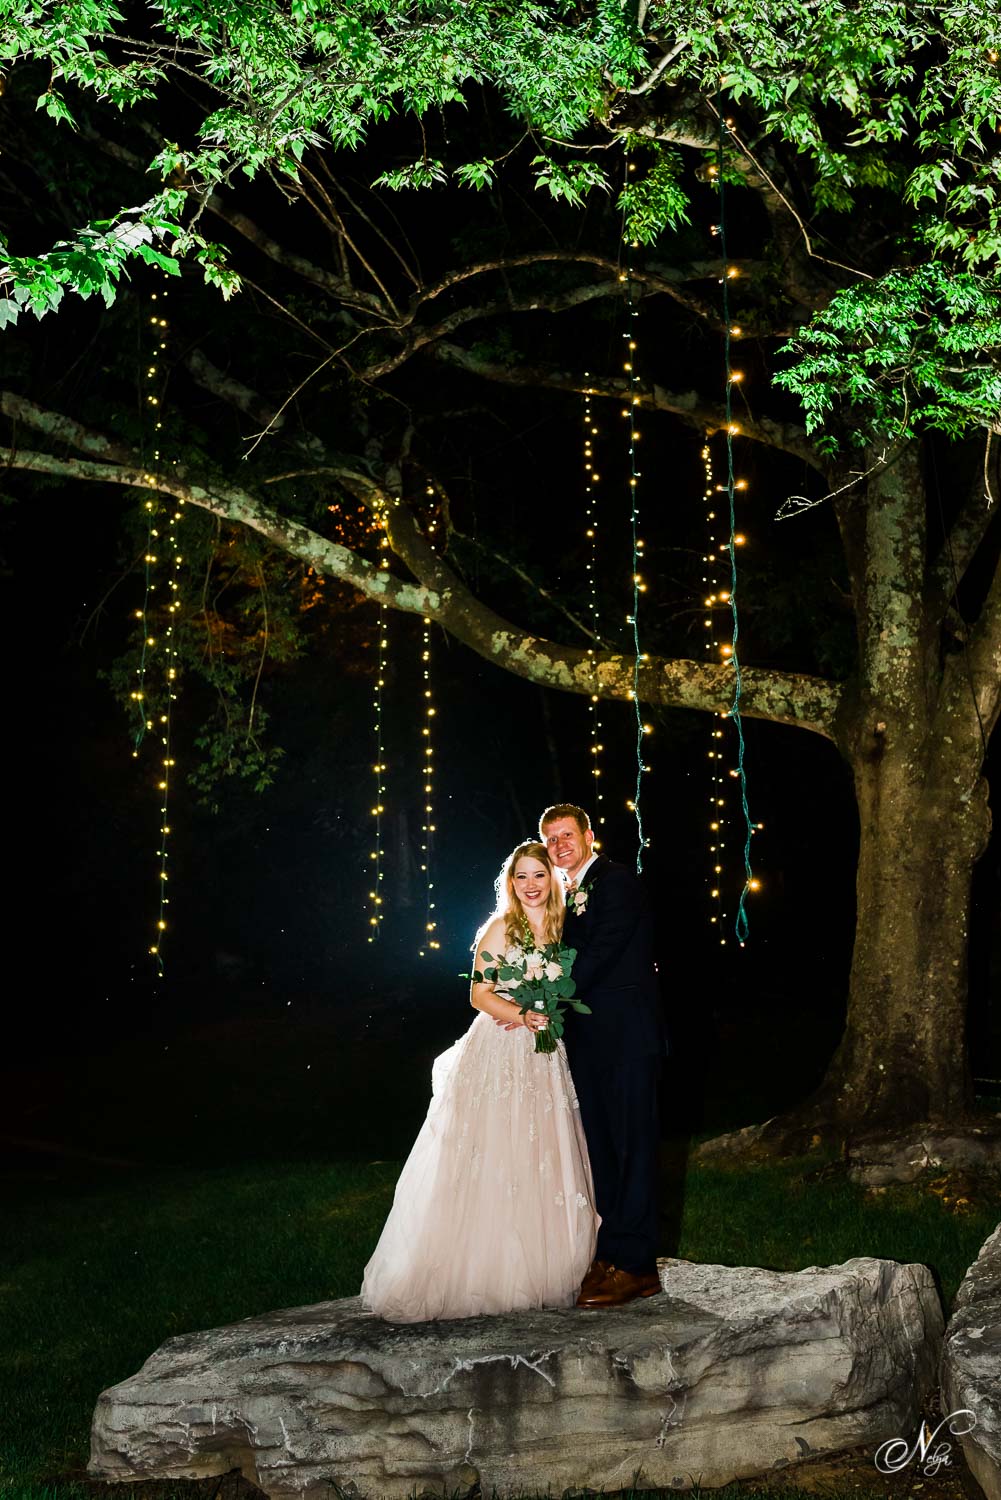 bride and groom outside at night under tree with twinkly lights at The Venue in Chattanooga TN